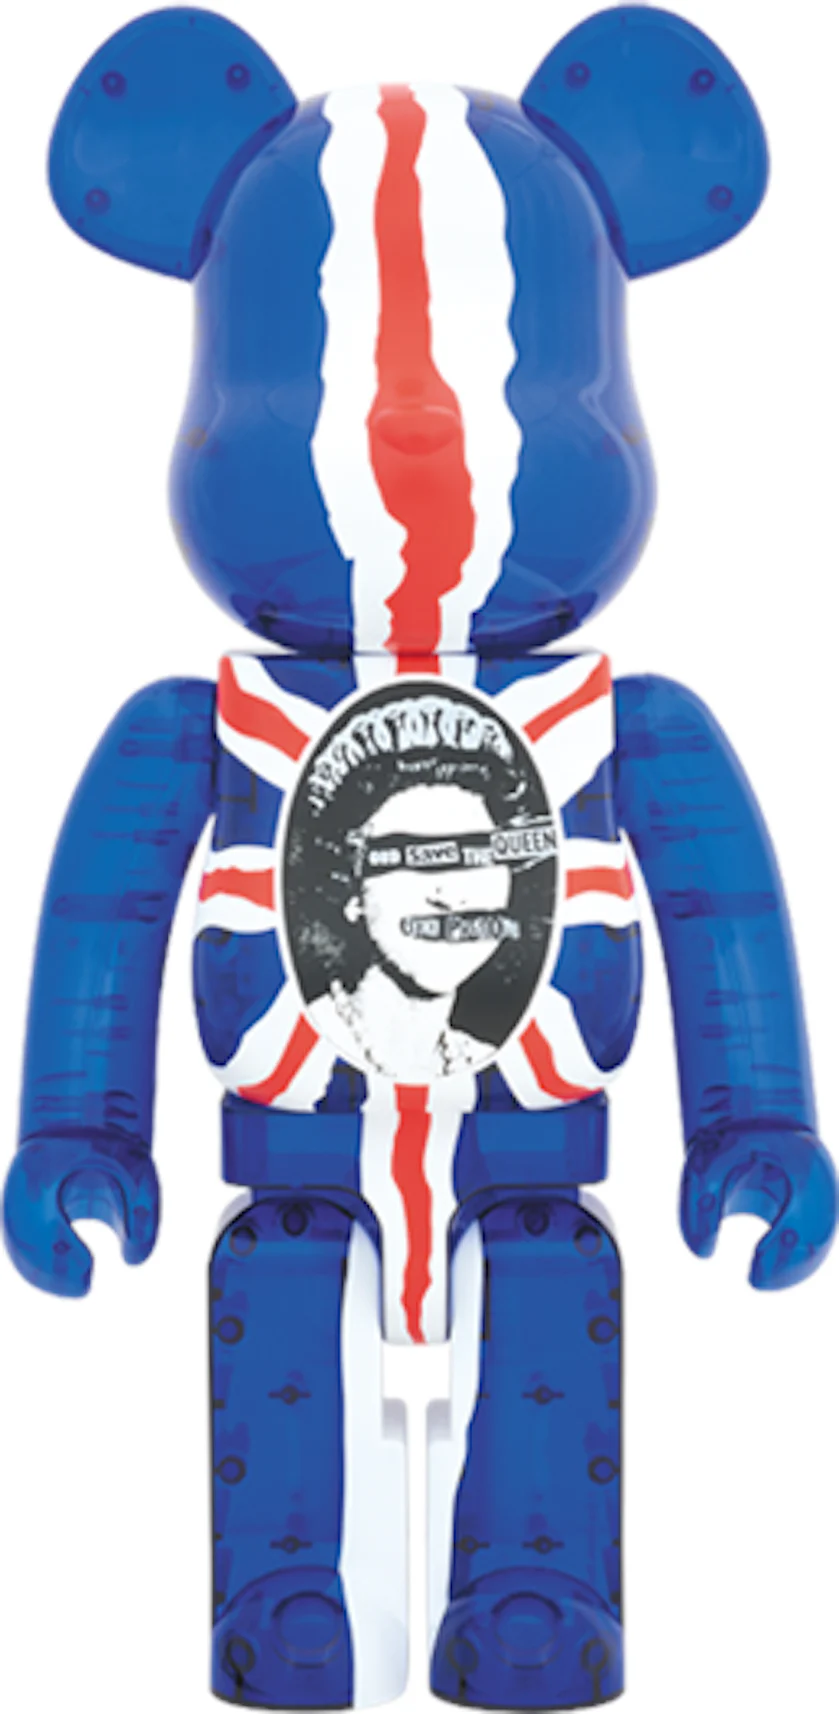 Bearbrick x Sex Pistols God Save The Queen Clear Version 1000% Multi